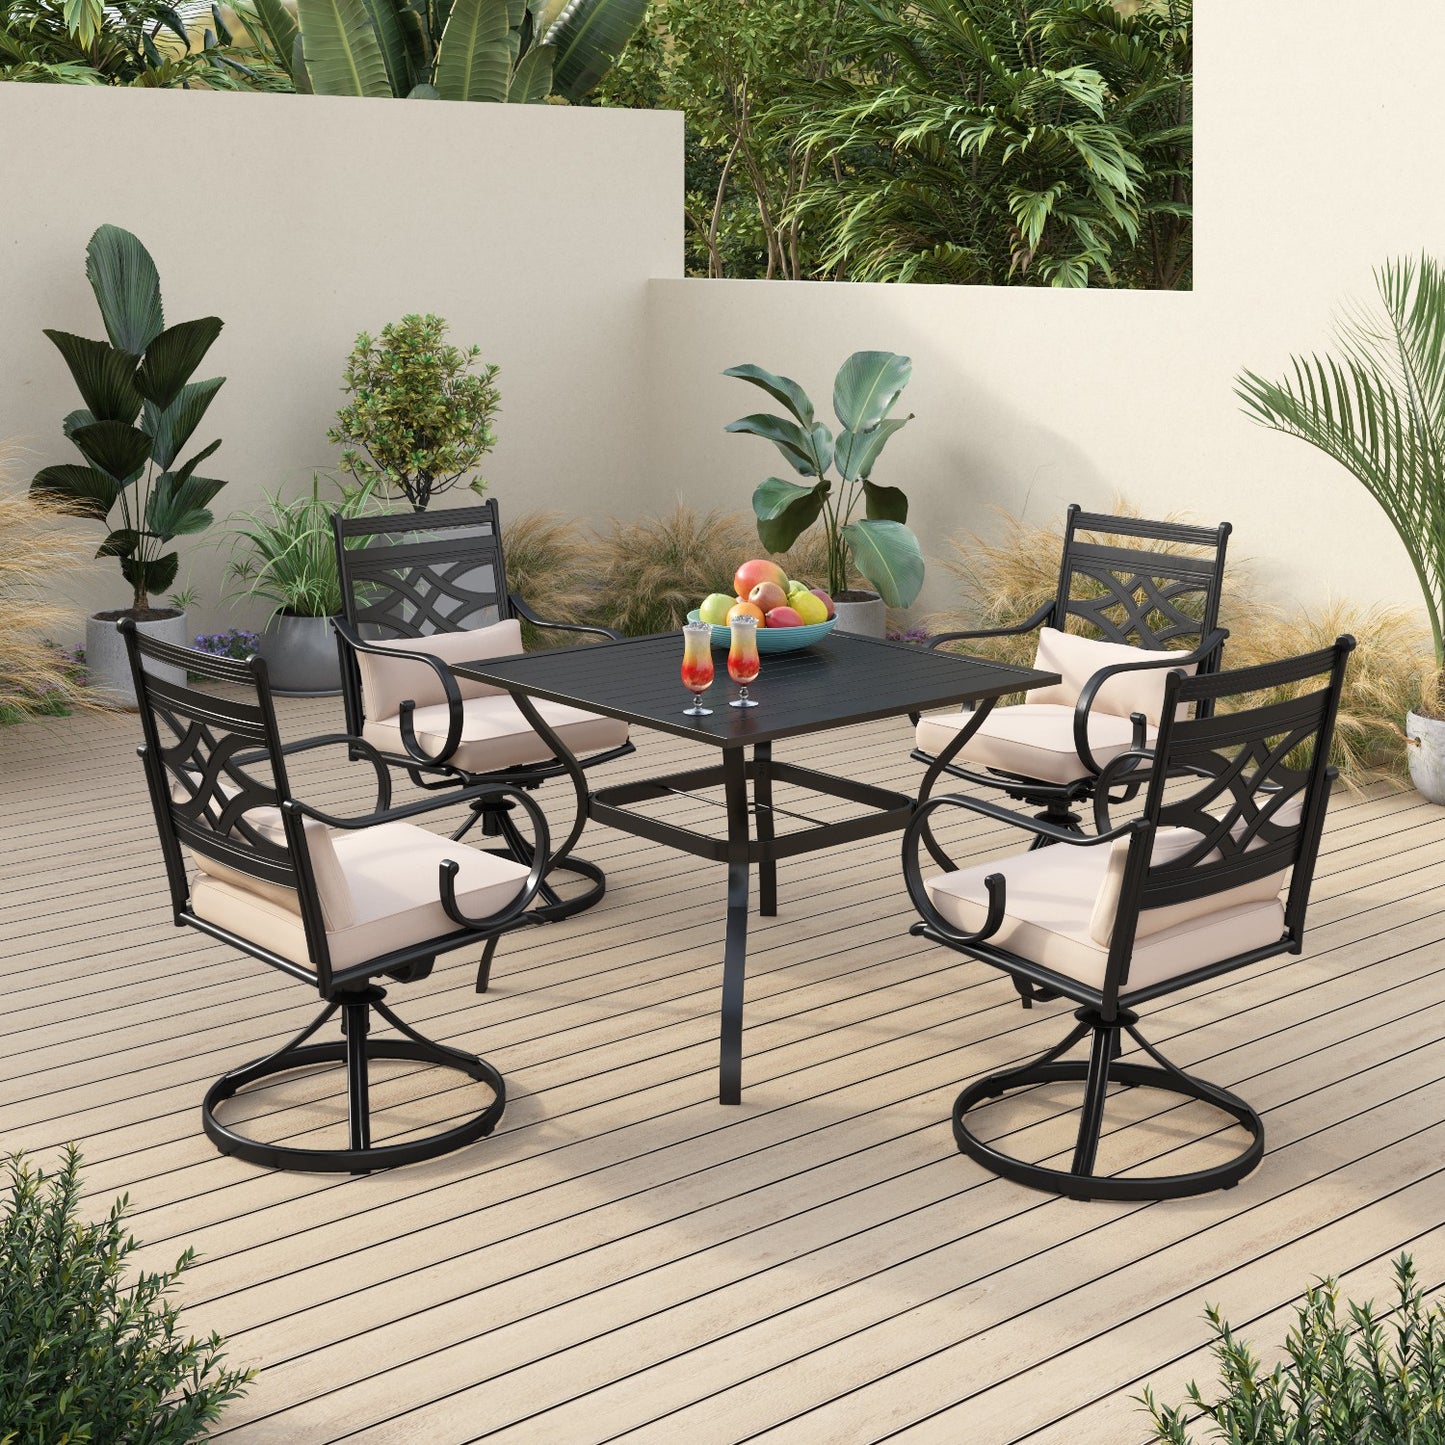 Sophia&William 5-Piece Outdoor Patio Dining Set Cushioned Swivel Chairs and Steel Table